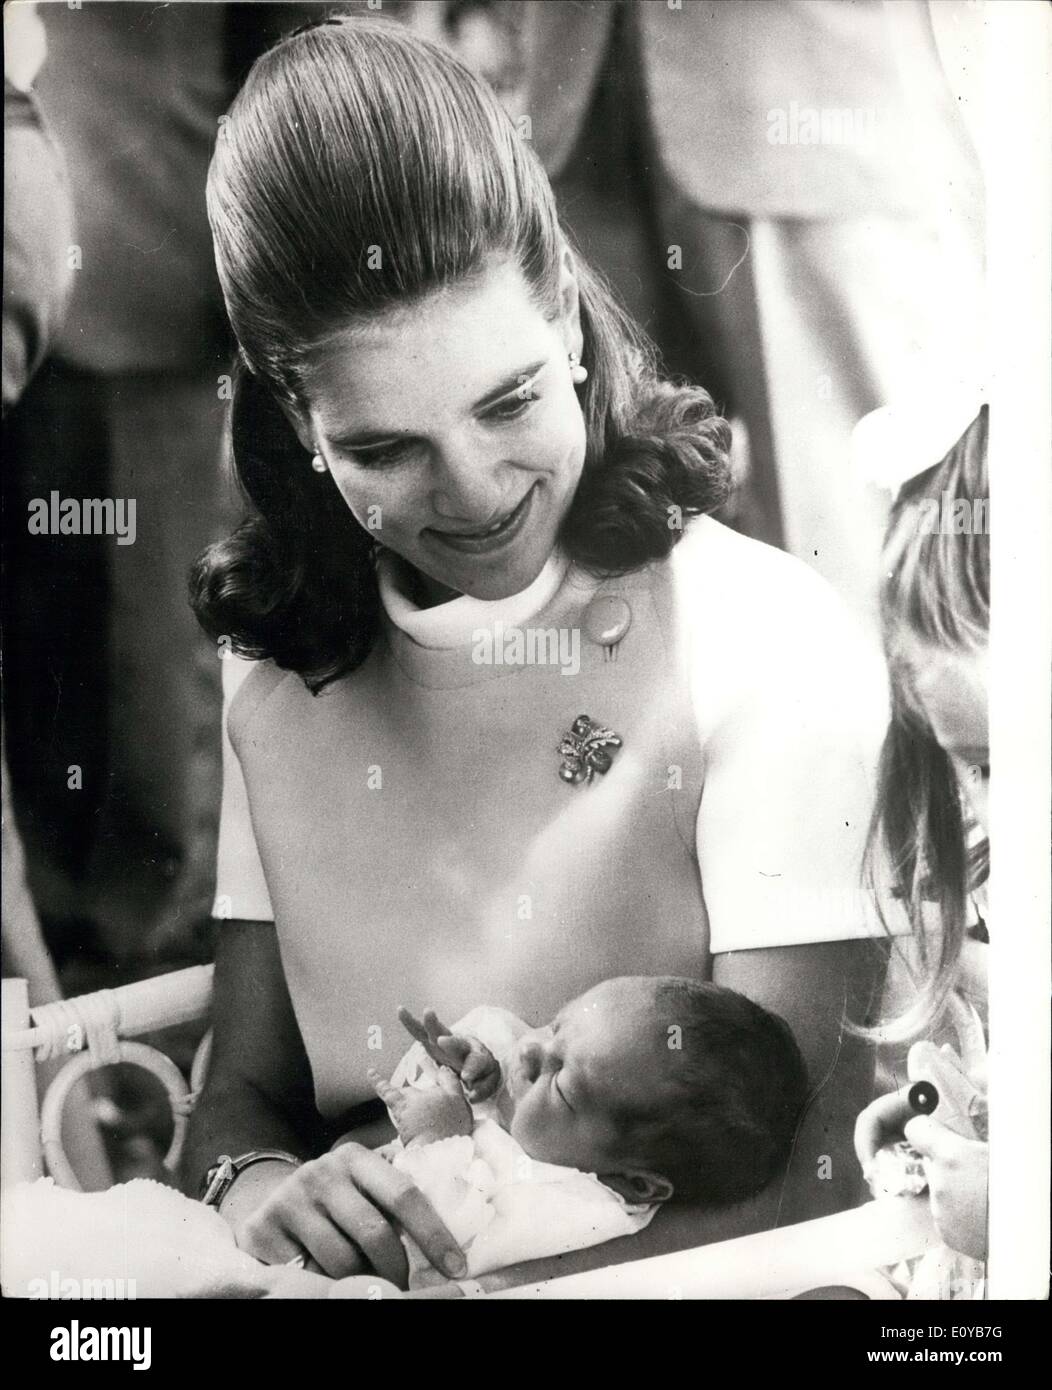 Oct. 10, 1969 - Queen Anne Marie And Her Third Child Prince Nicholas In Rome. Photo Shows: Queen Anne Marie, wife of King Constantine of Greece pictured with her new baby son, Prince Nicholas seen in the garden of their villa in Rome. Stock Photo